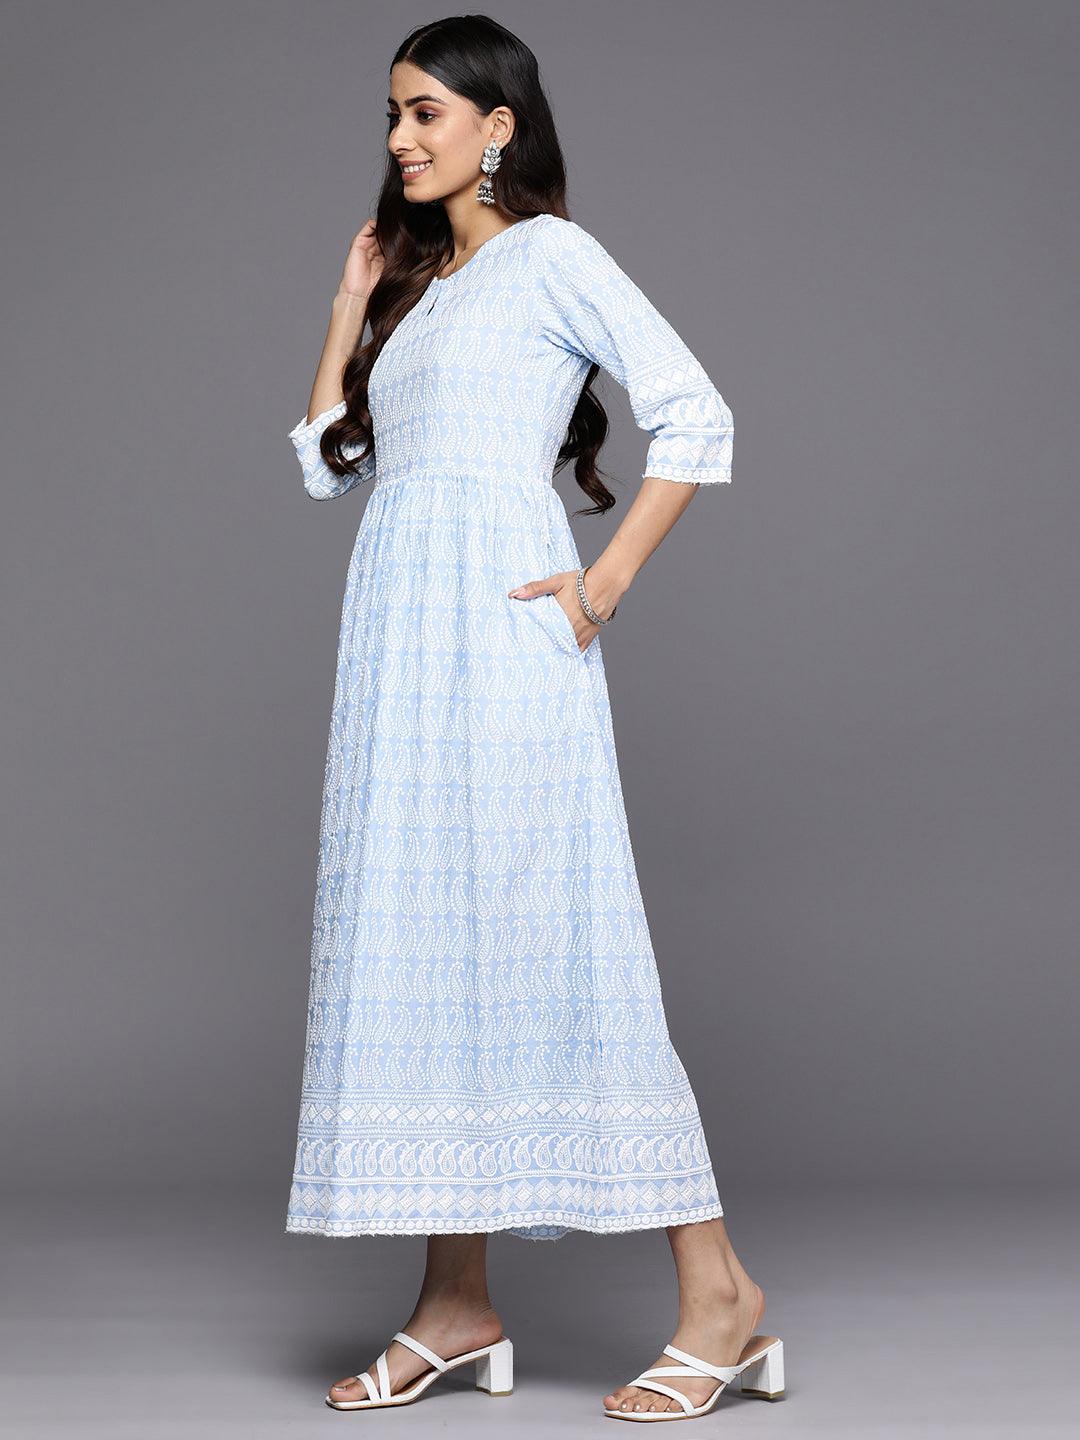 Blue Embroidered Rayon Fit and Flare Dress